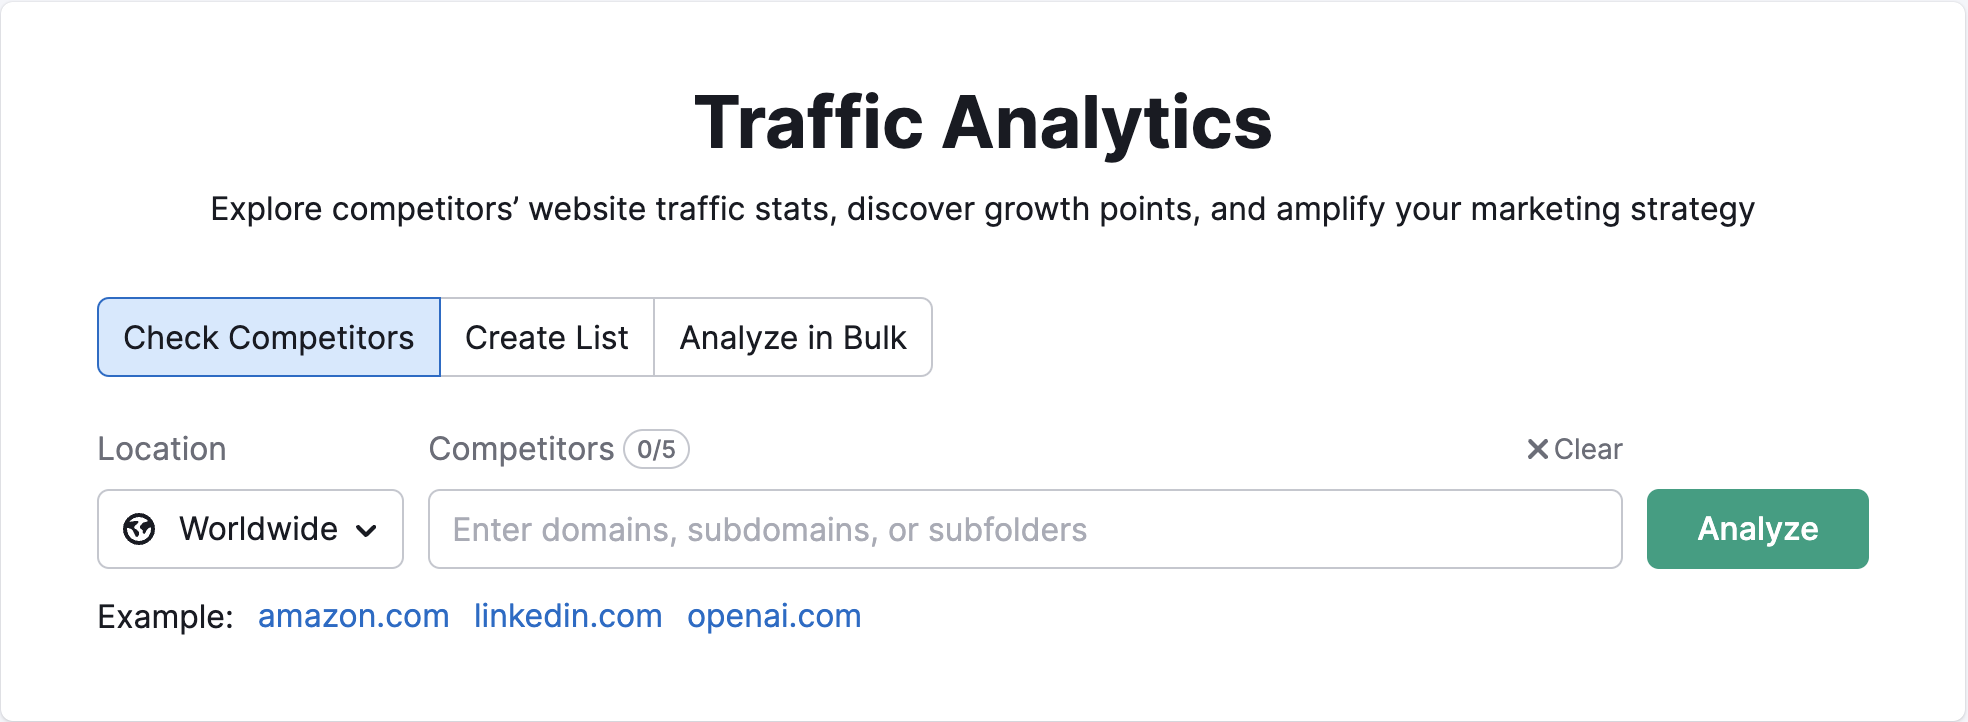 Traffic Analytics starting page in Semrush. Showing where to type in the competitor domain and select location. 